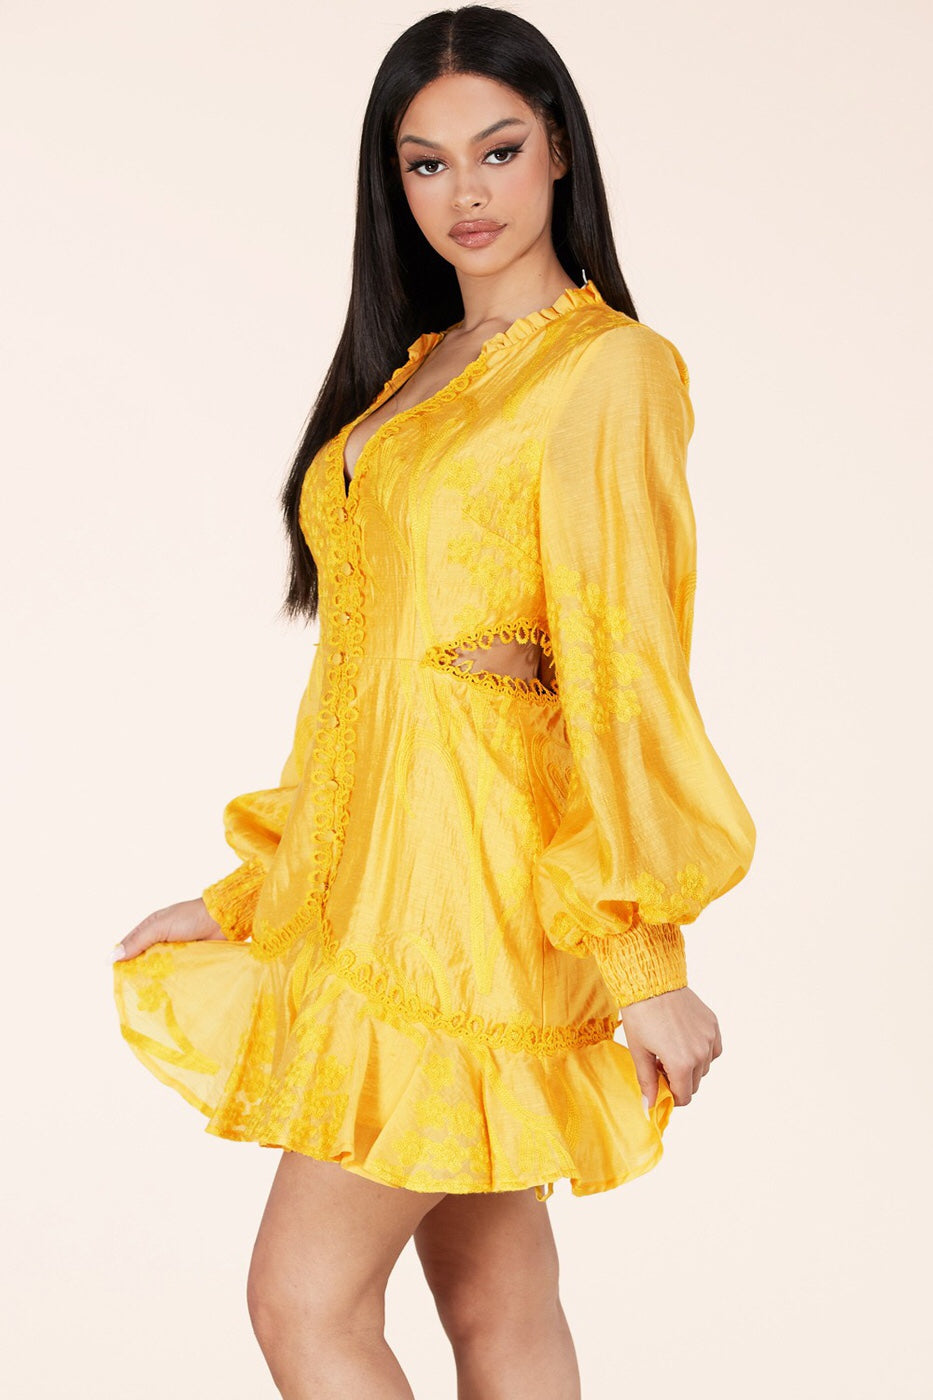 Beautiful Golden Mustard Embroidered Woman’s Fashion